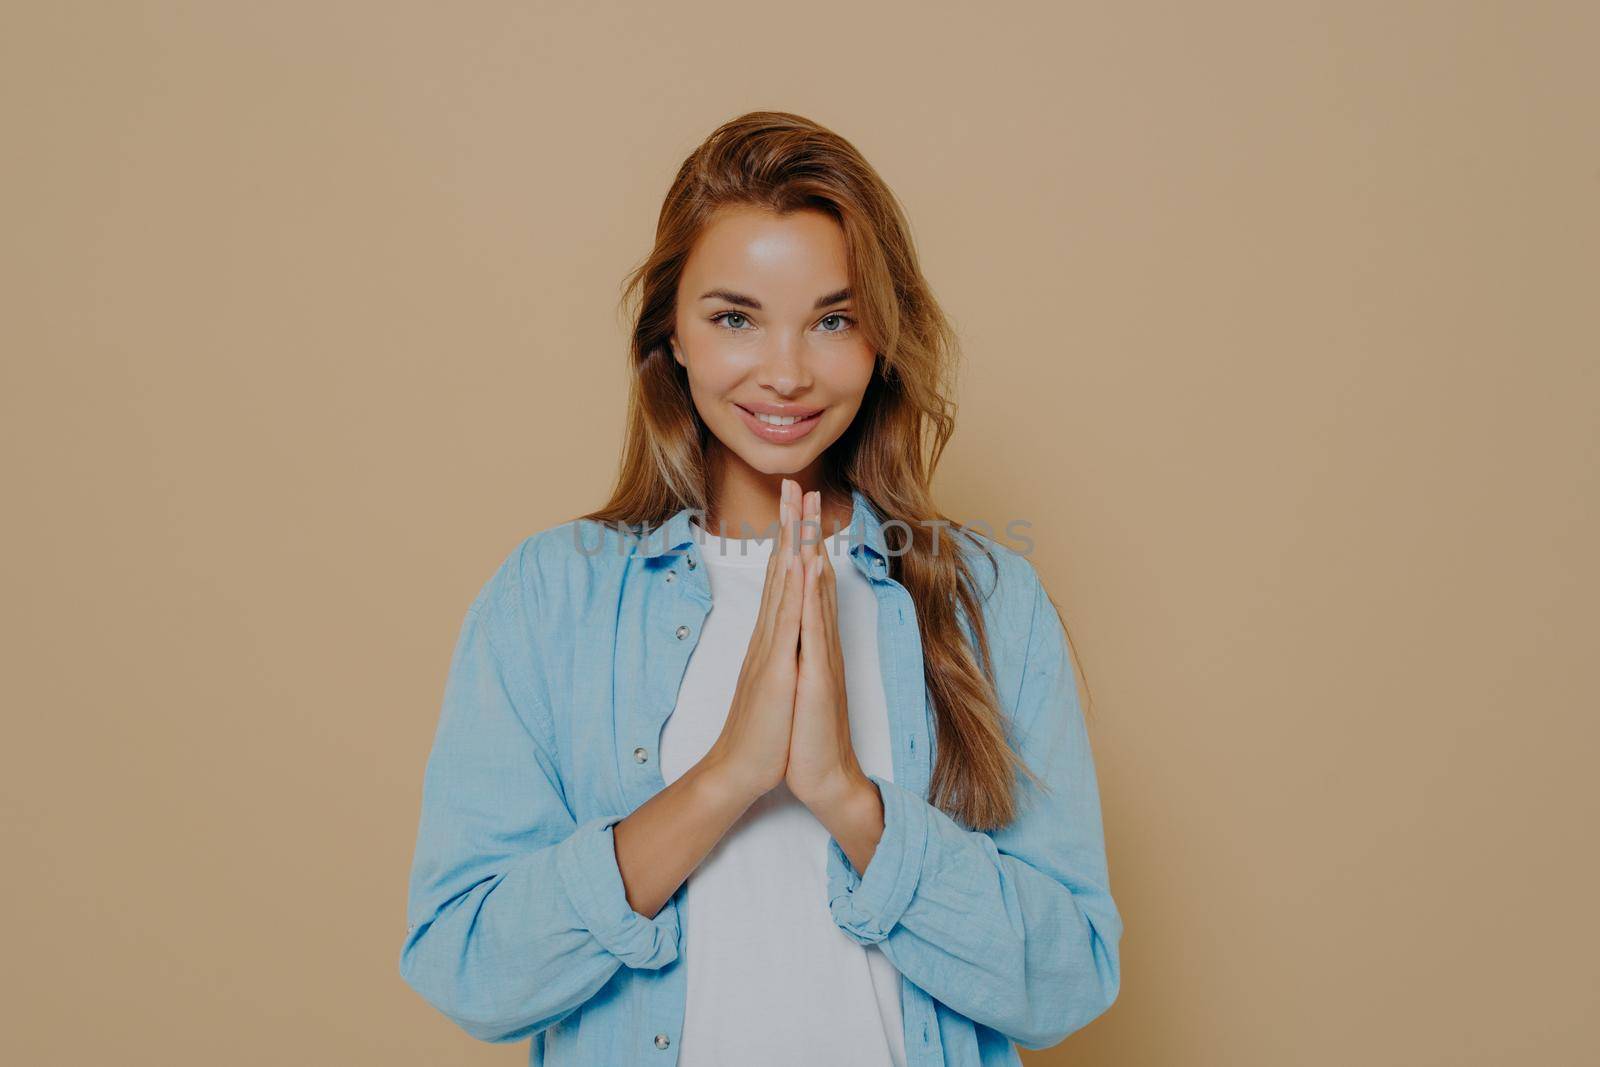 Pleased attractive woman putting her palms together in hope and prayer gesture and wishing for best, looking smiling at camera isolated on beige background. Body language concept